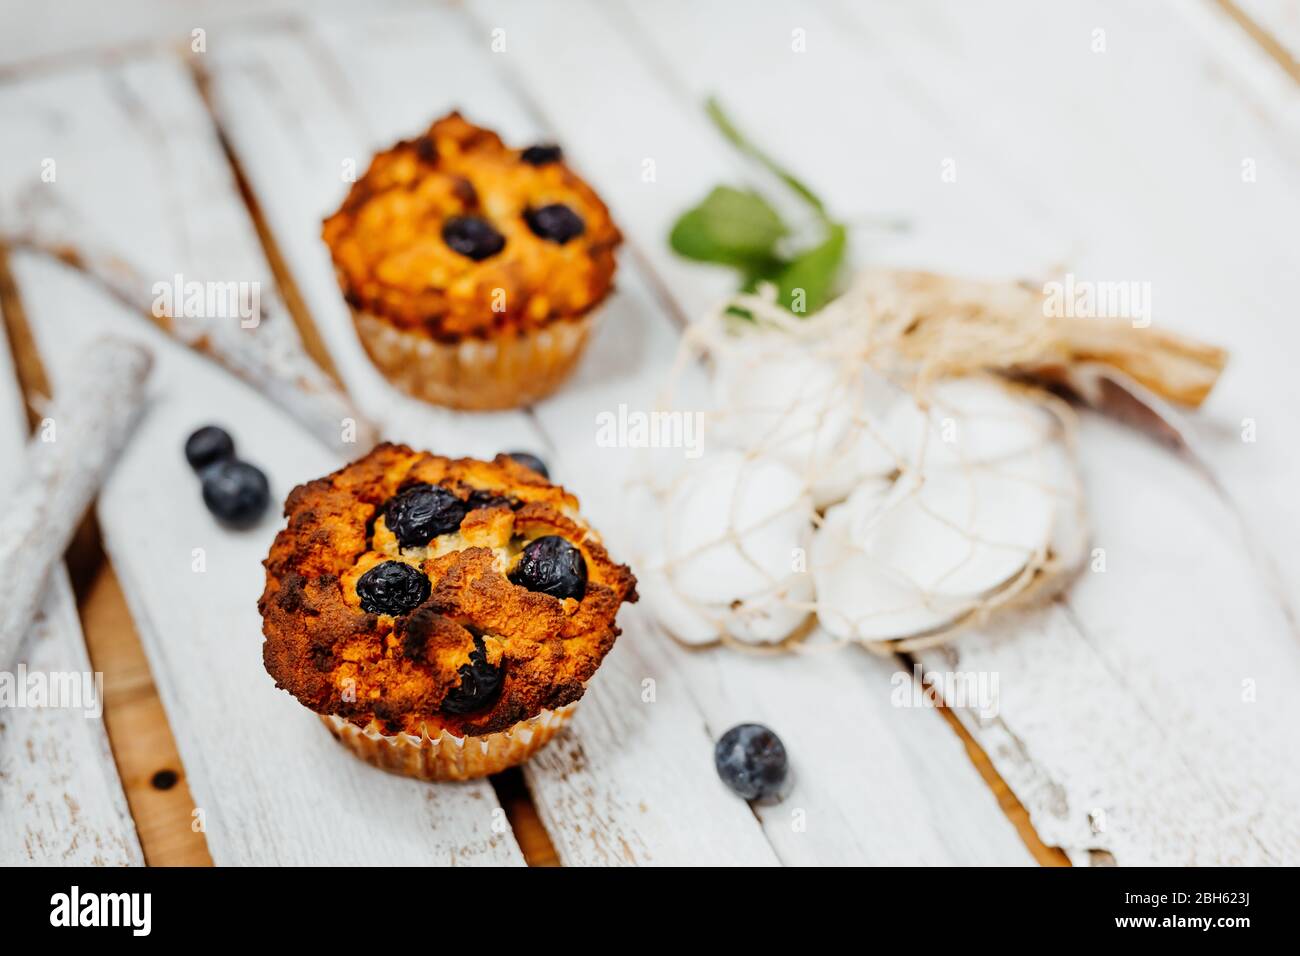 Healthy muffins with coconut flour and blueberries on light wooden plate decorated with mint an conch shells Stock Photo